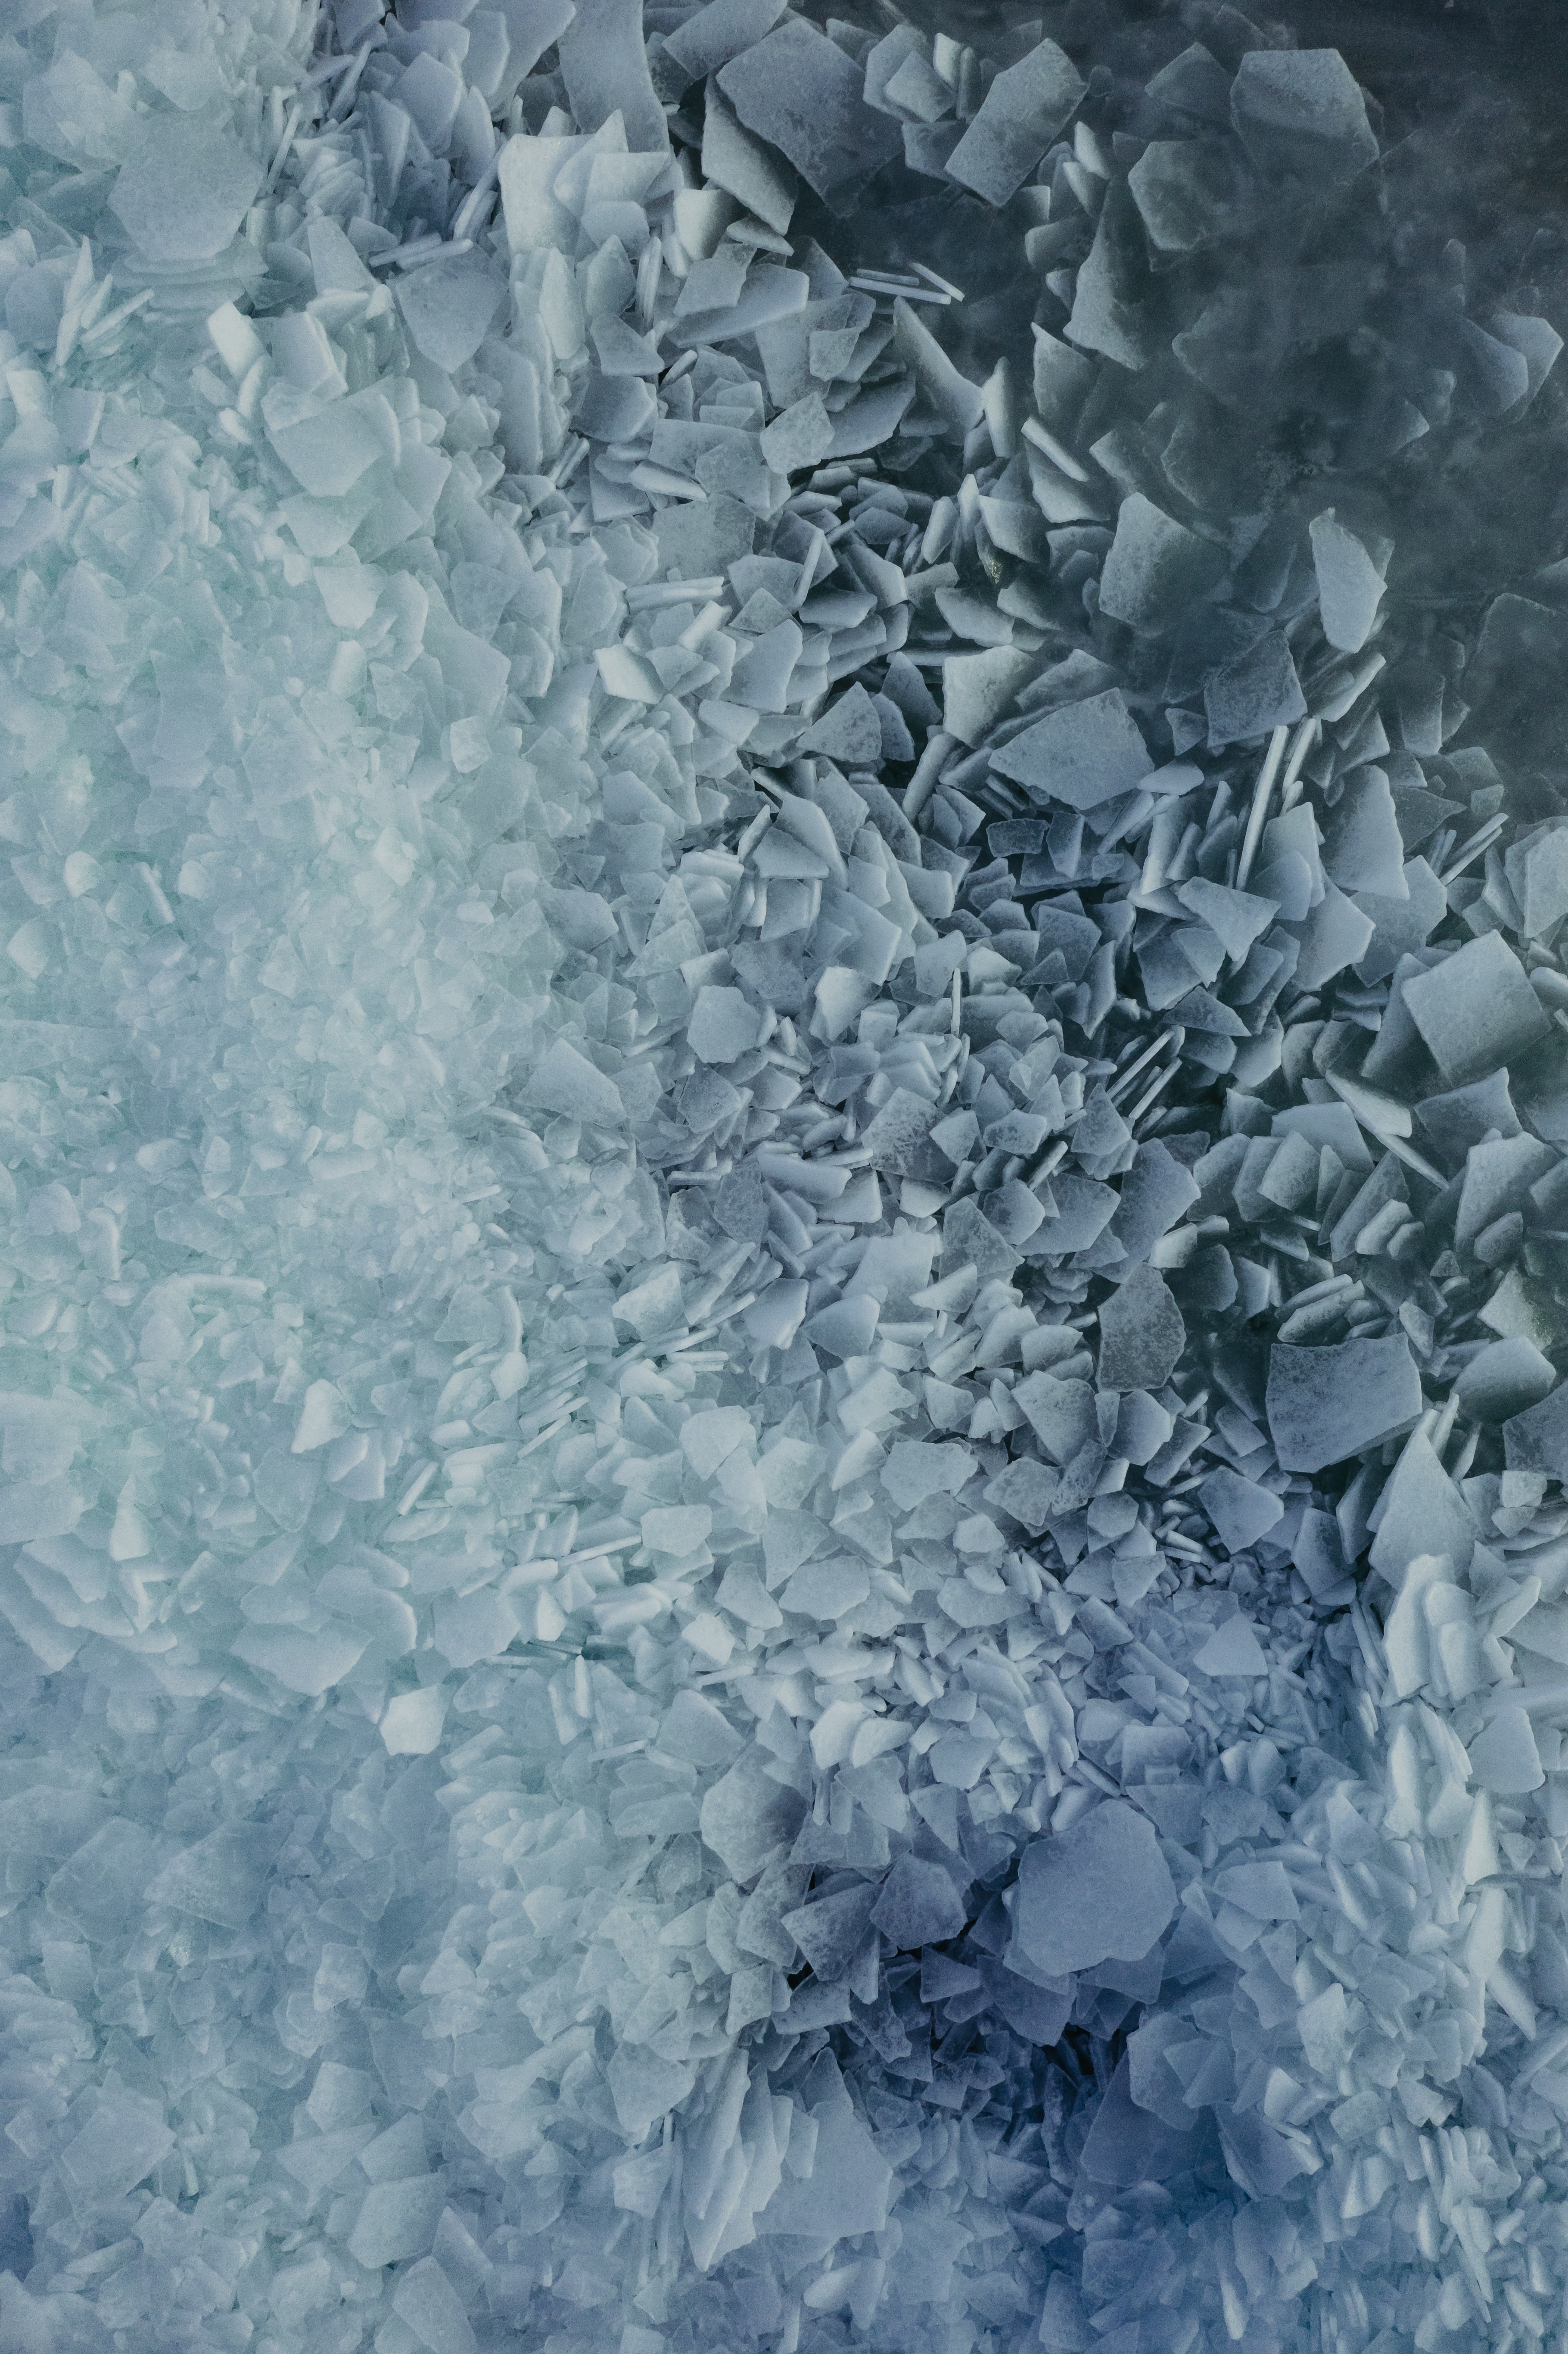 shards, nature, water, ice, view from above, smithereens 1080p